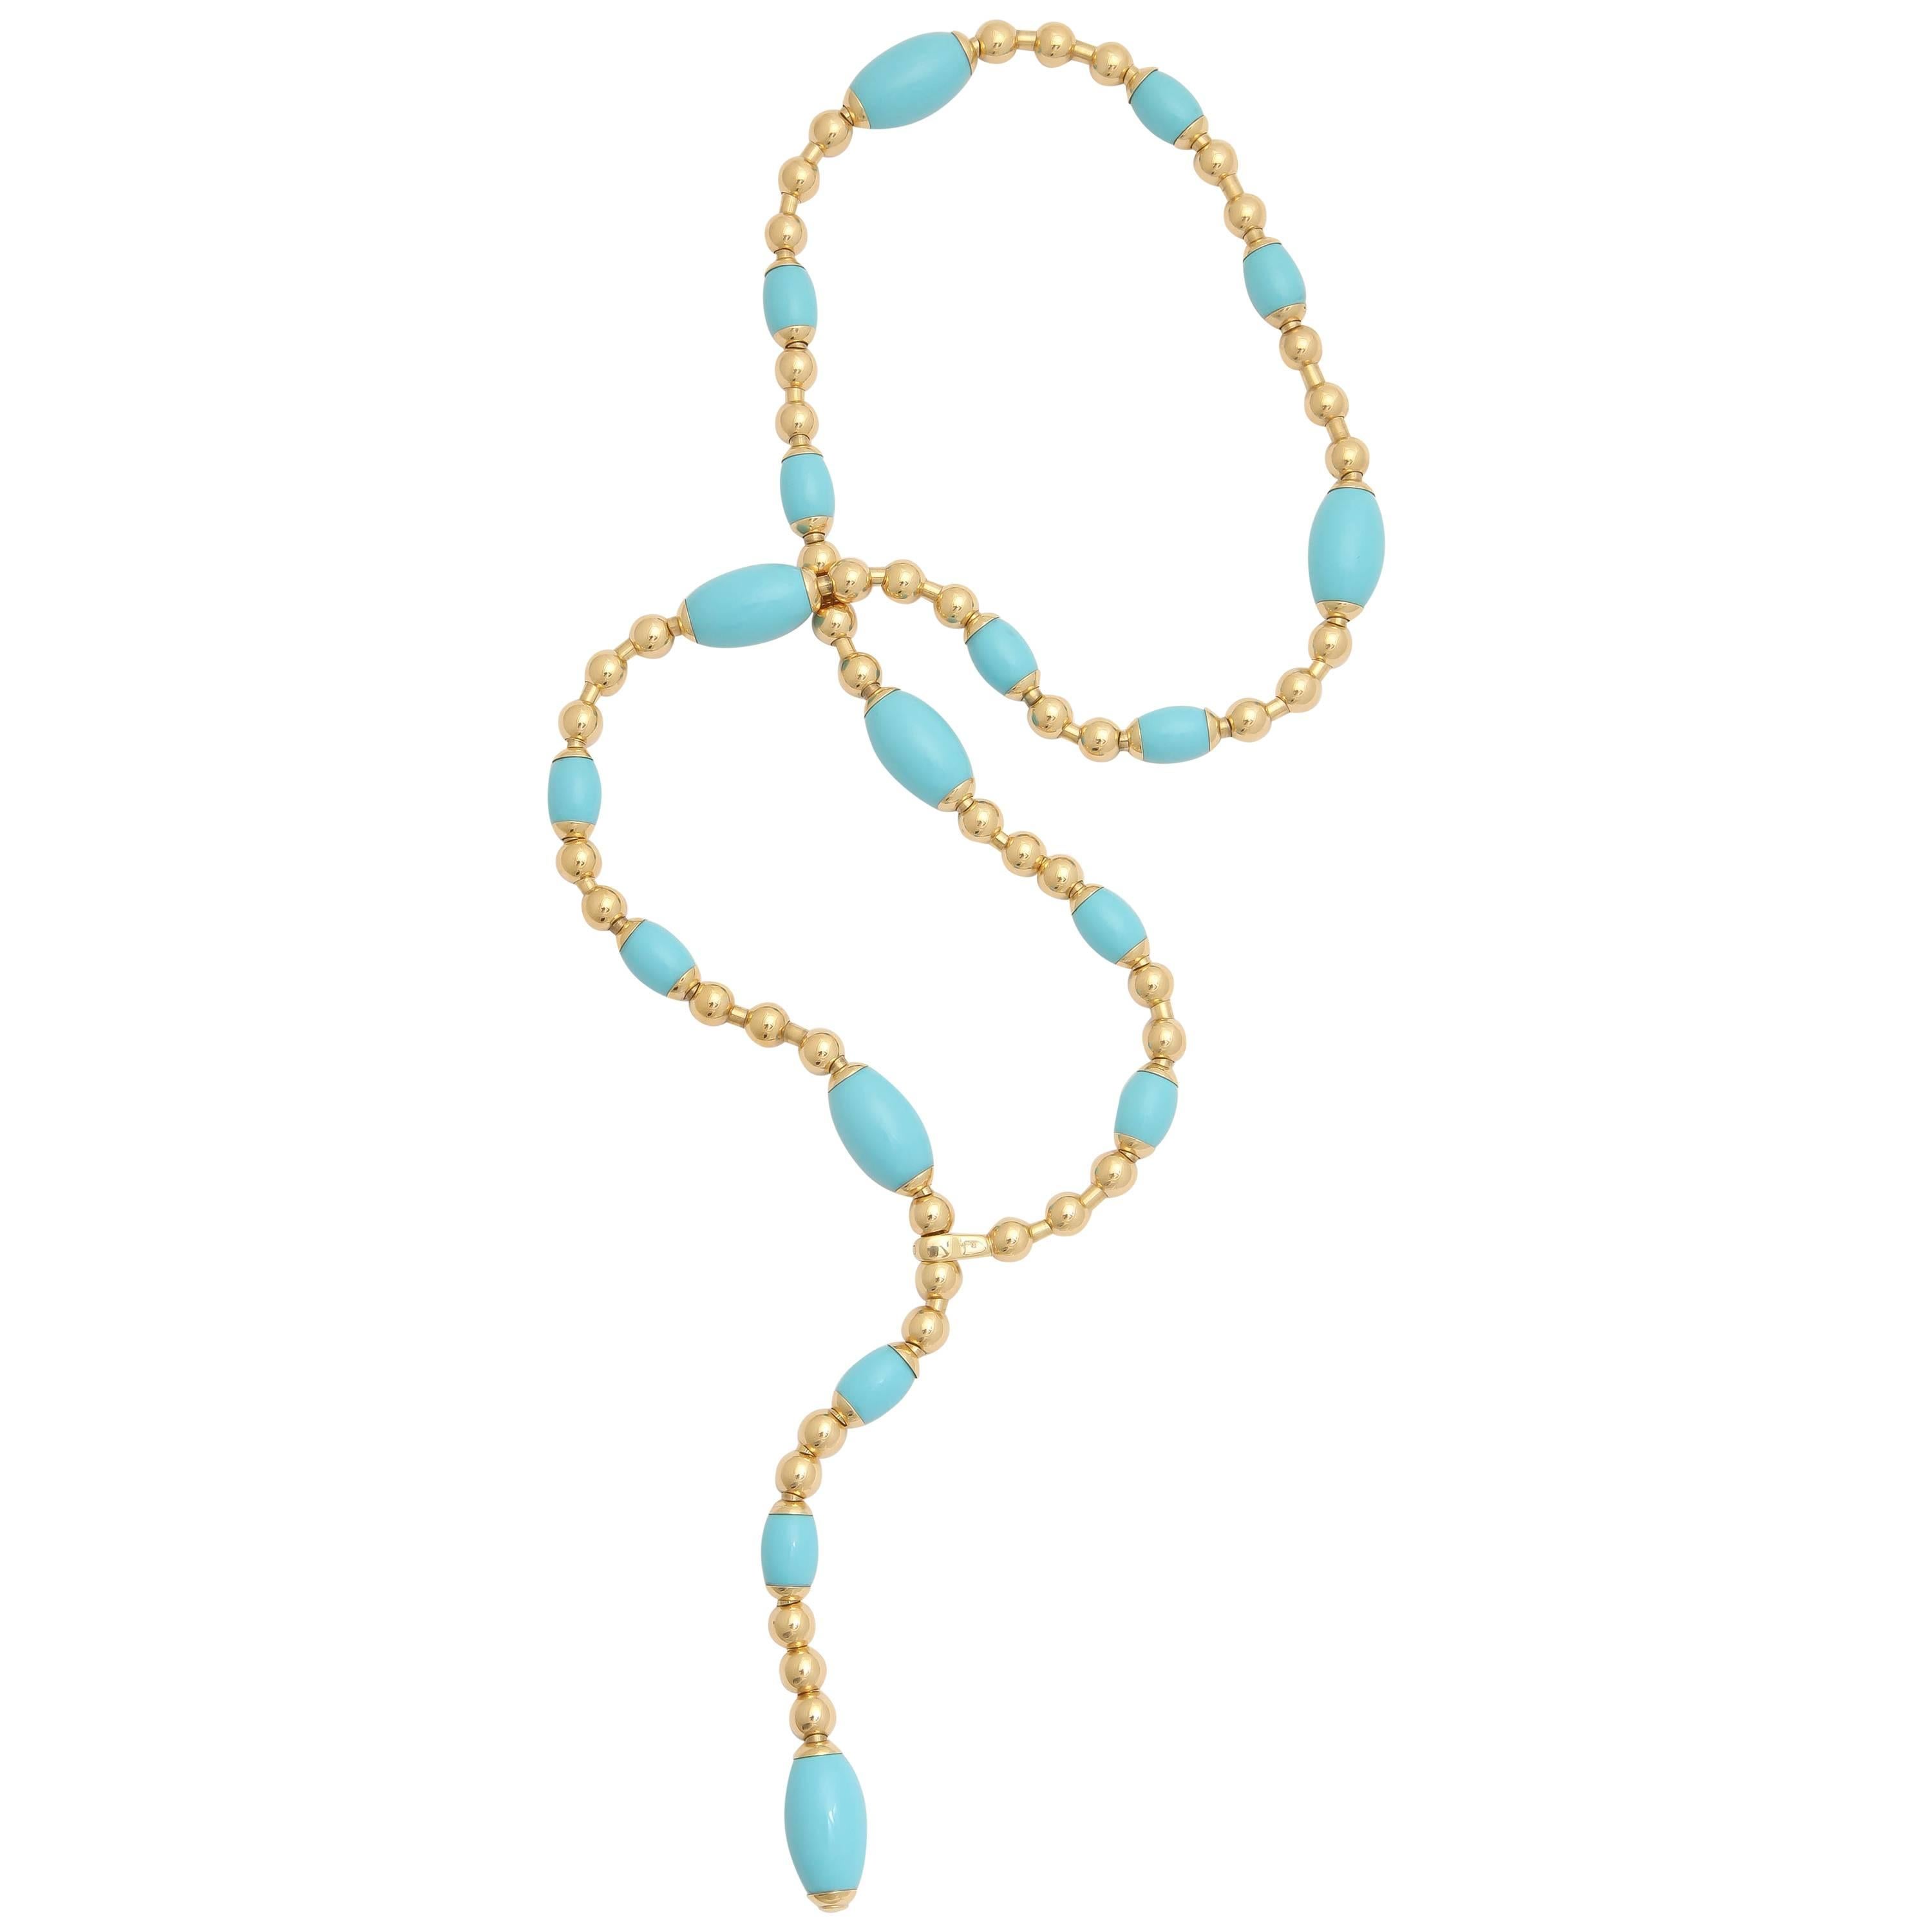 18KT yellow gold turquoise necklace. 